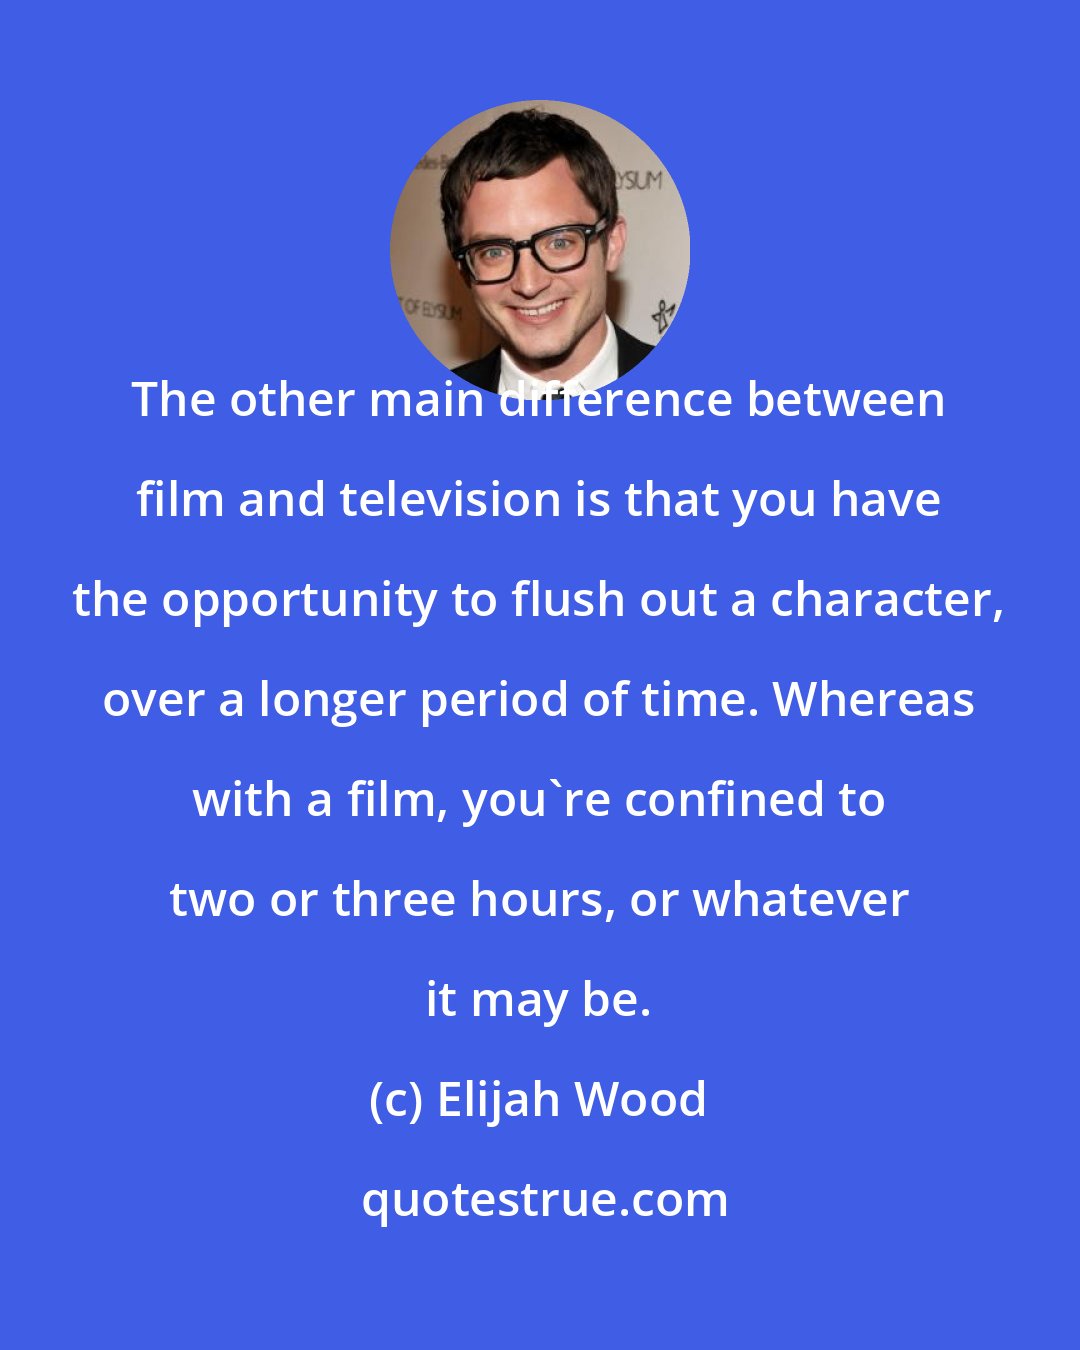 Elijah Wood: The other main difference between film and television is that you have the opportunity to flush out a character, over a longer period of time. Whereas with a film, you're confined to two or three hours, or whatever it may be.